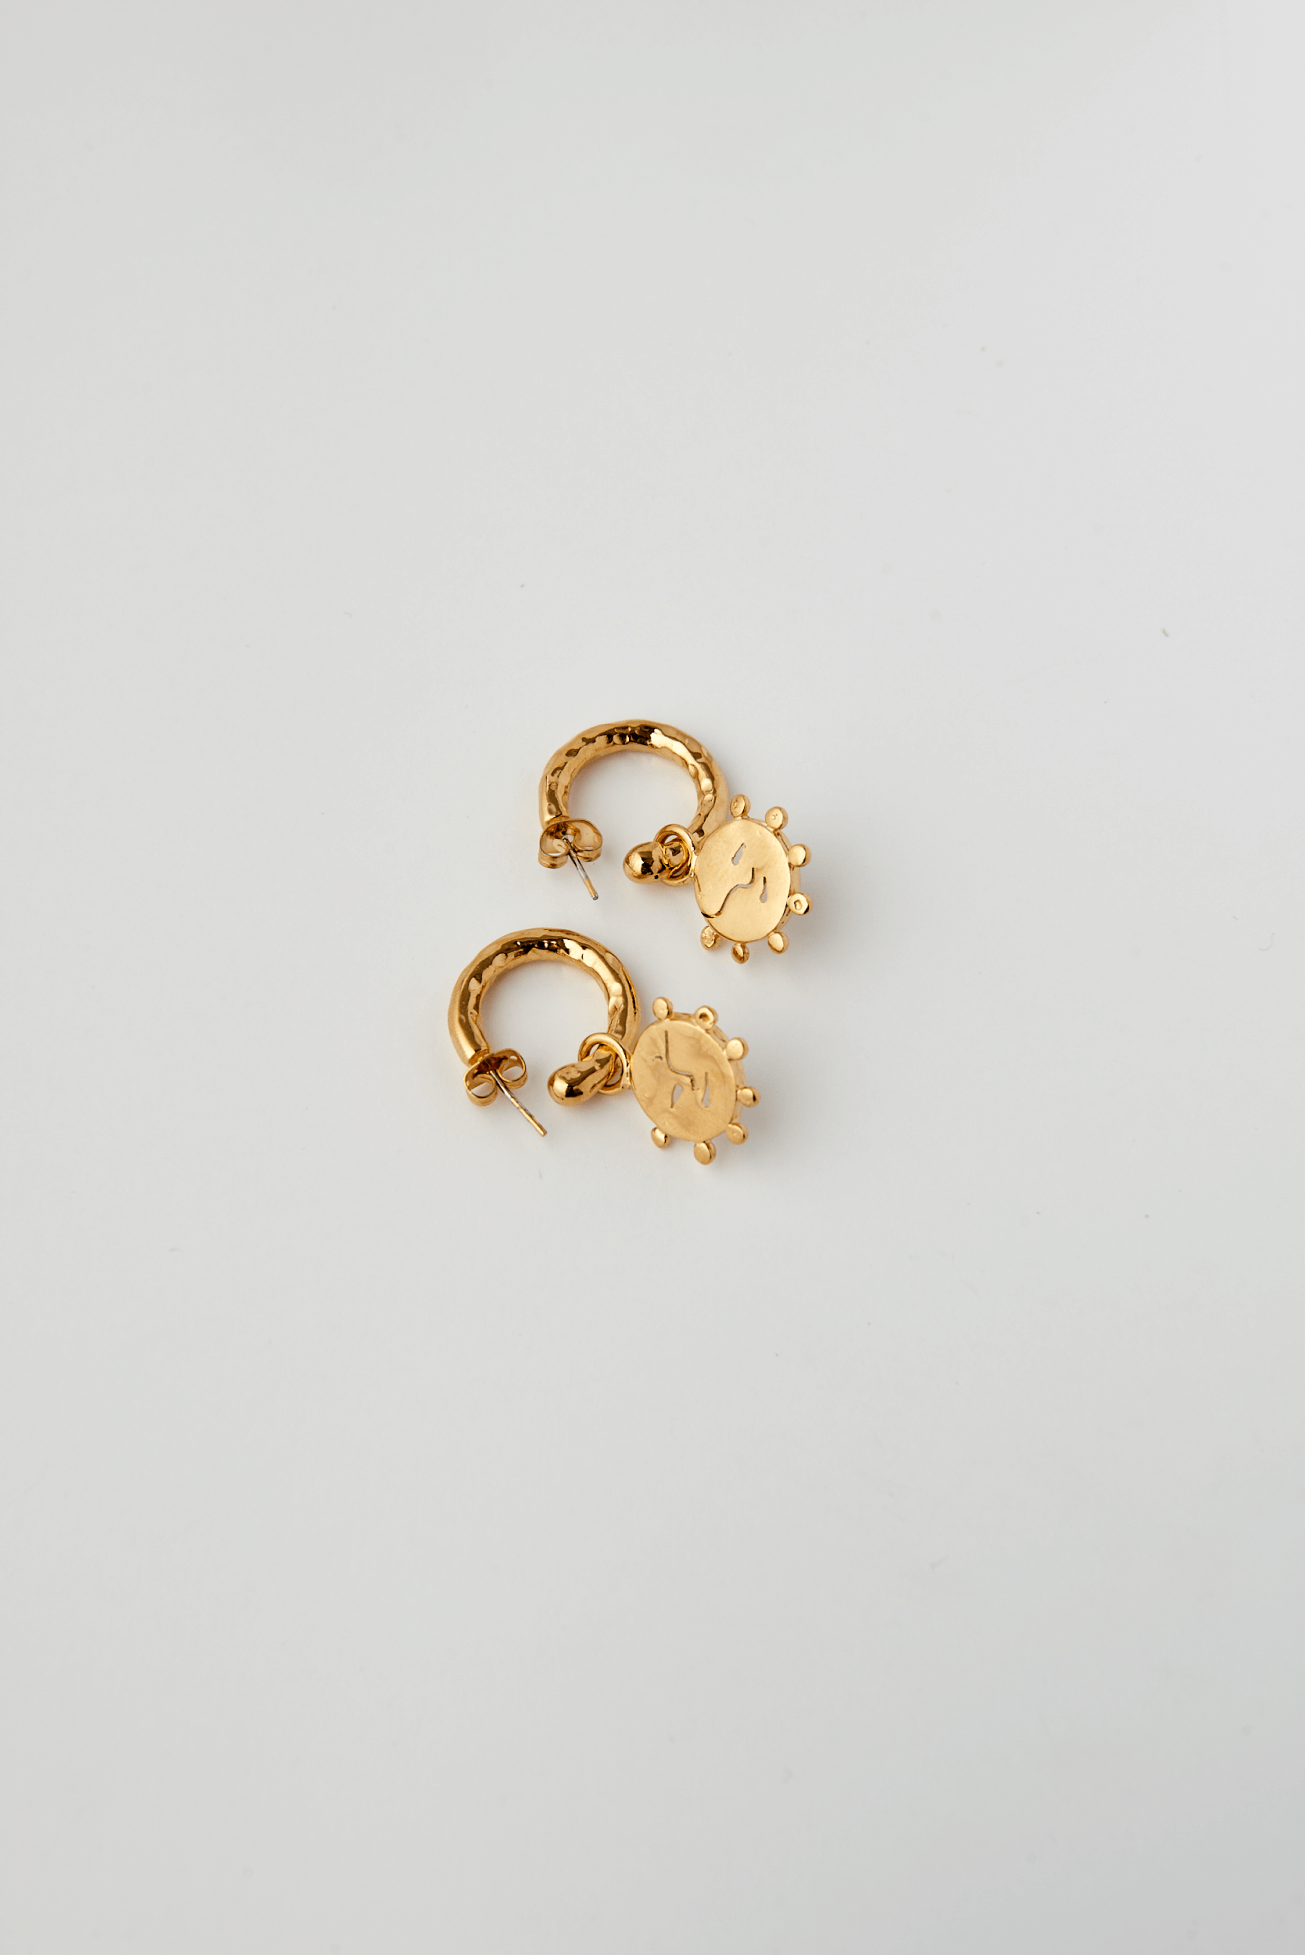 Shop Juwa Studs Earrings by We Are NBO on Arrai. Discover stylish, affordable clothing, jewelry, handbags and unique handmade pieces from top Kenyan & African fashion brands prioritising sustainability and quality craftsmanship.